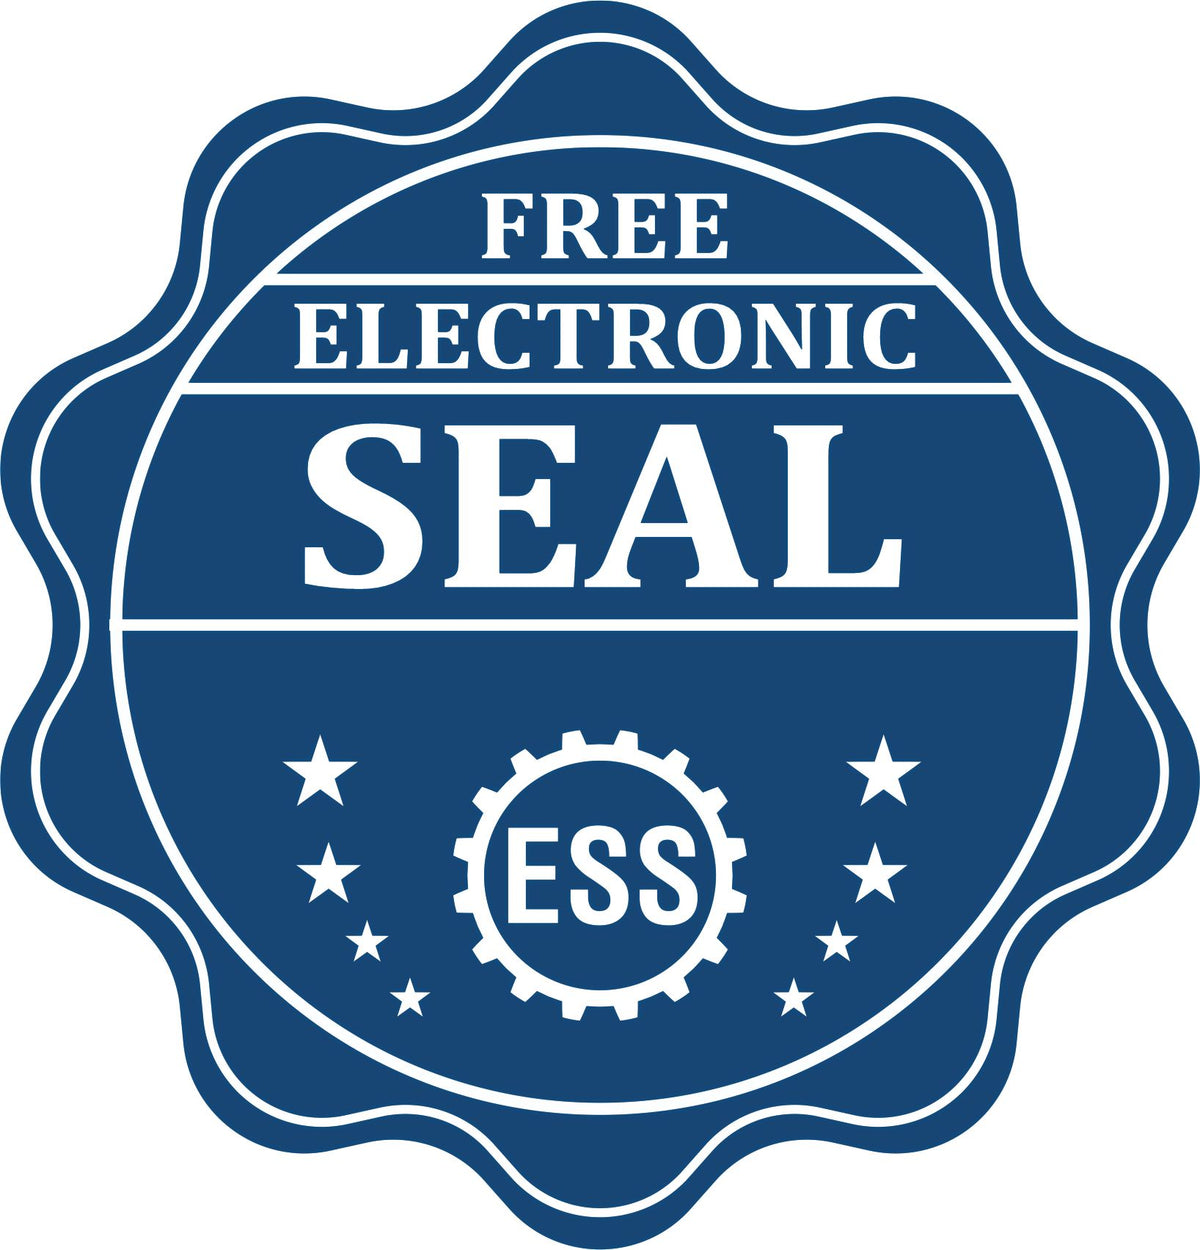 A badge showing a free electronic seal for the Heavy-Duty Wyoming Rectangular Notary Stamp with stars and the ESS gear on the emblem.